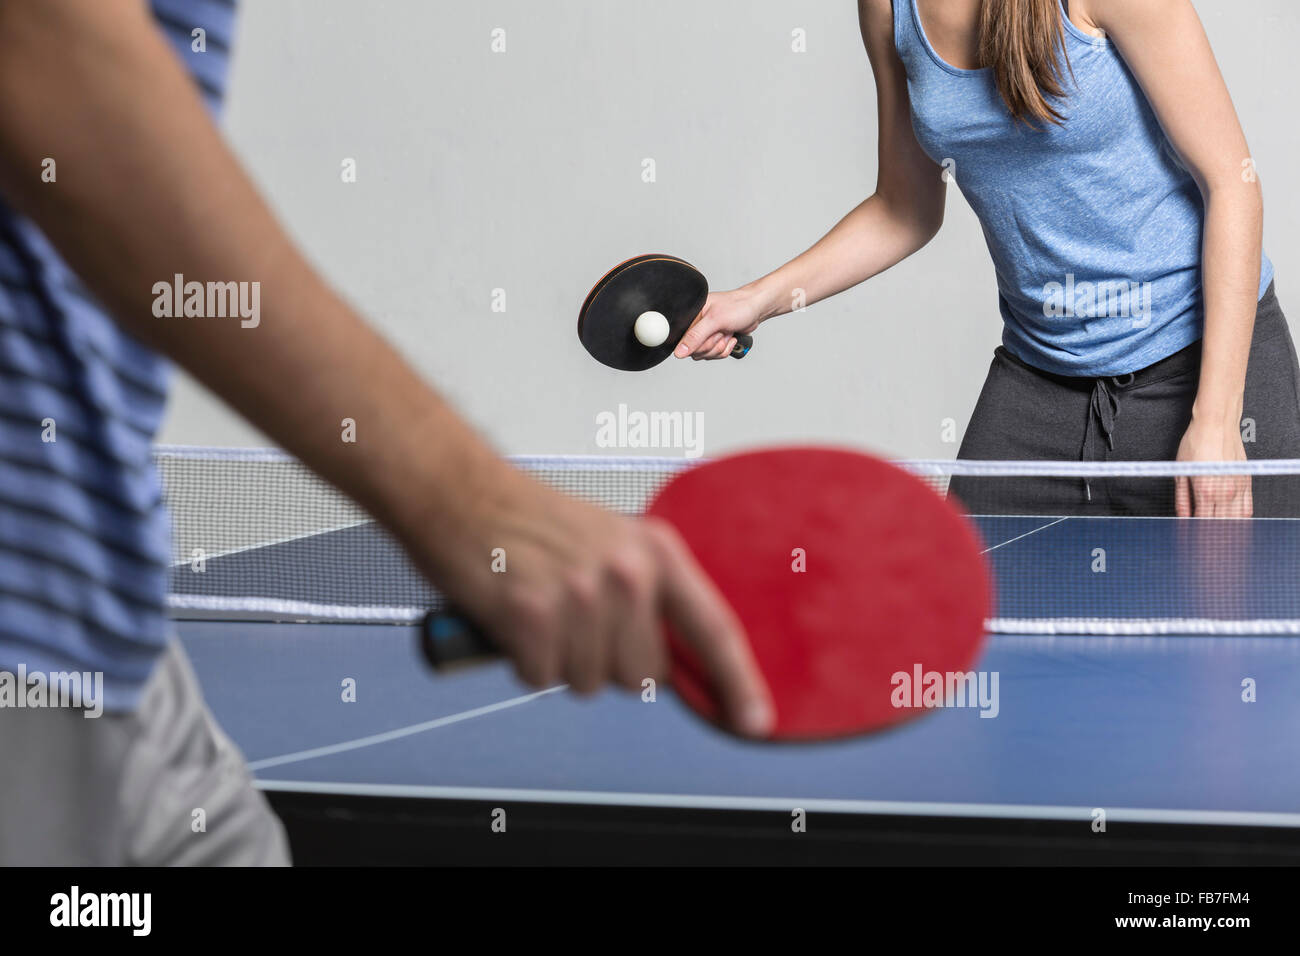 Midsection of man and woman playing table tennis Stock Photo